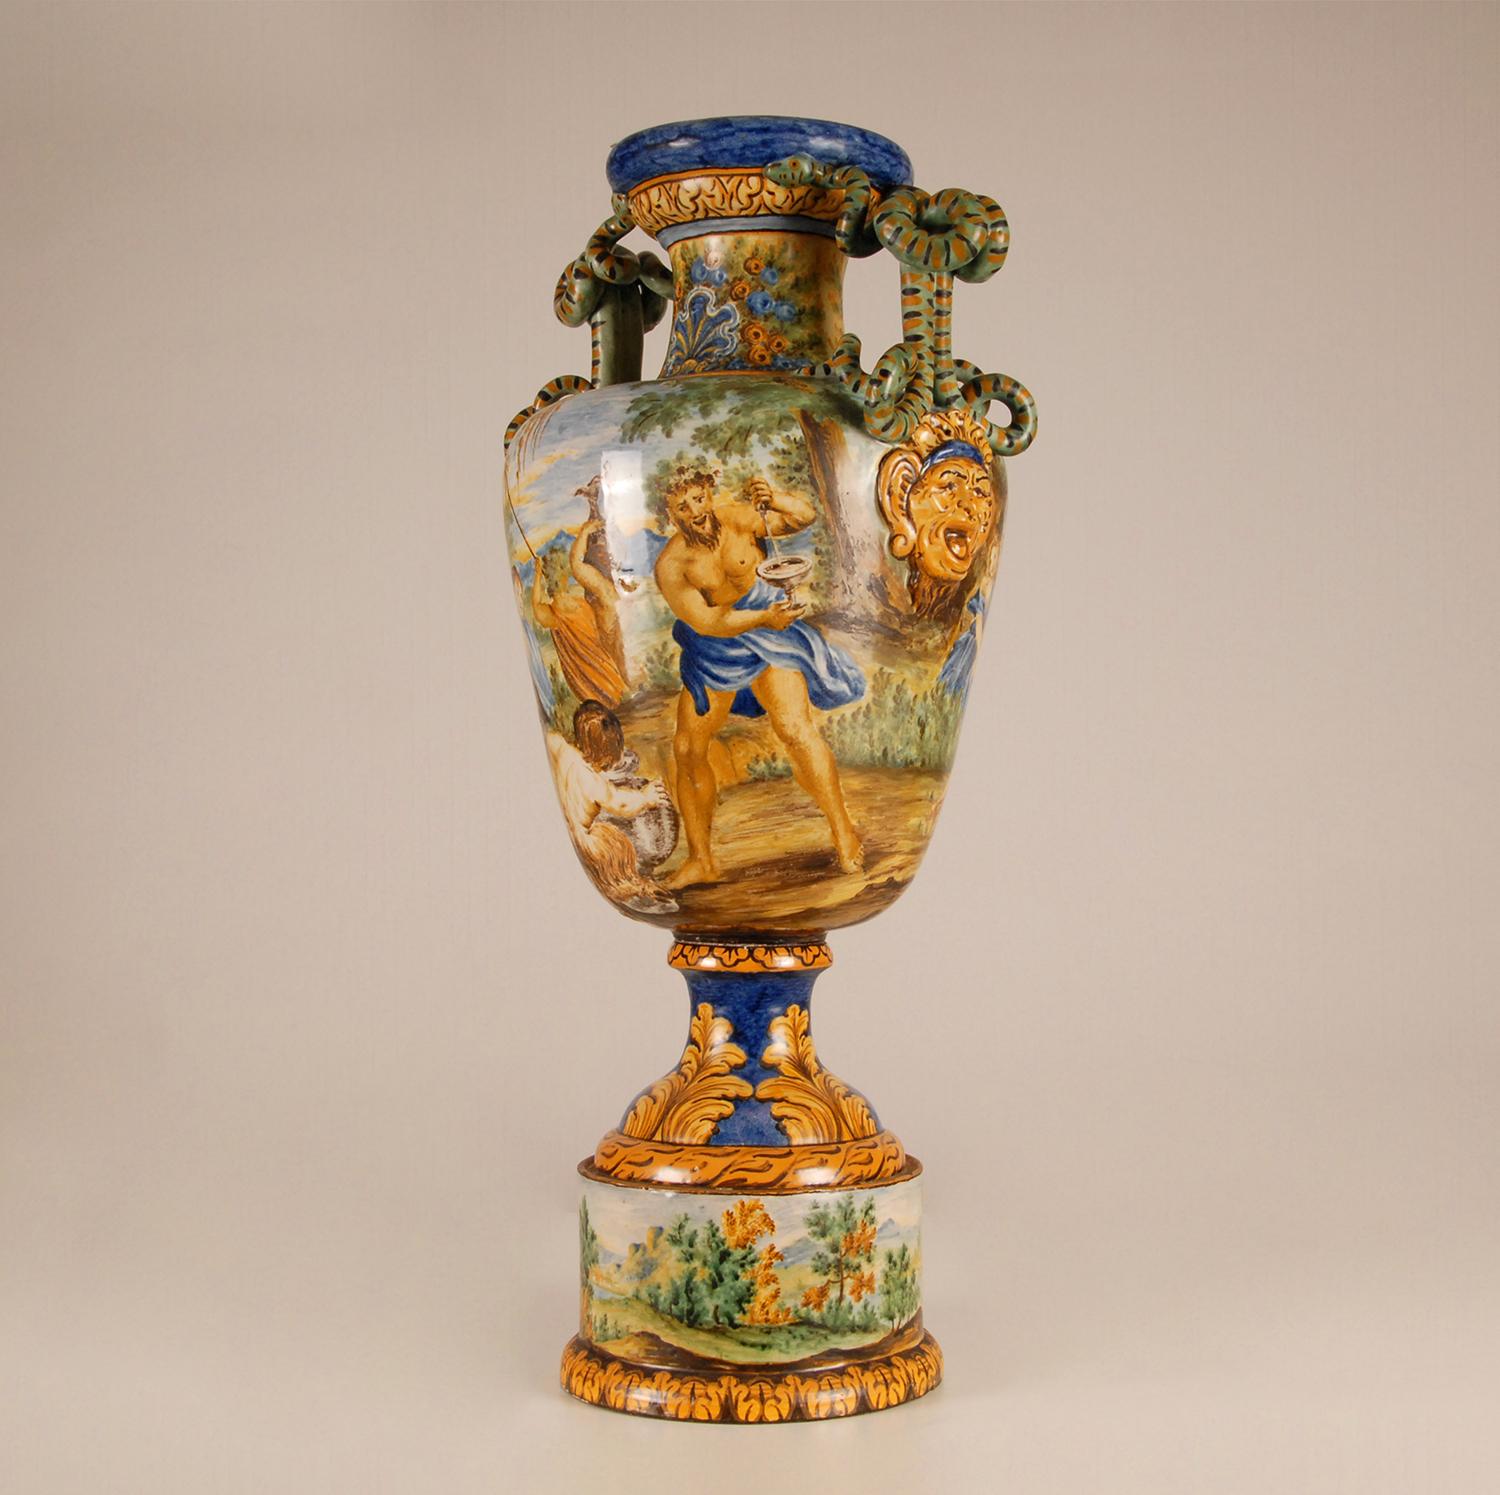 Hand-Painted Majolica Renaissance Vase Serpentine Handles Bacchus Italy 19th Century Revival  For Sale